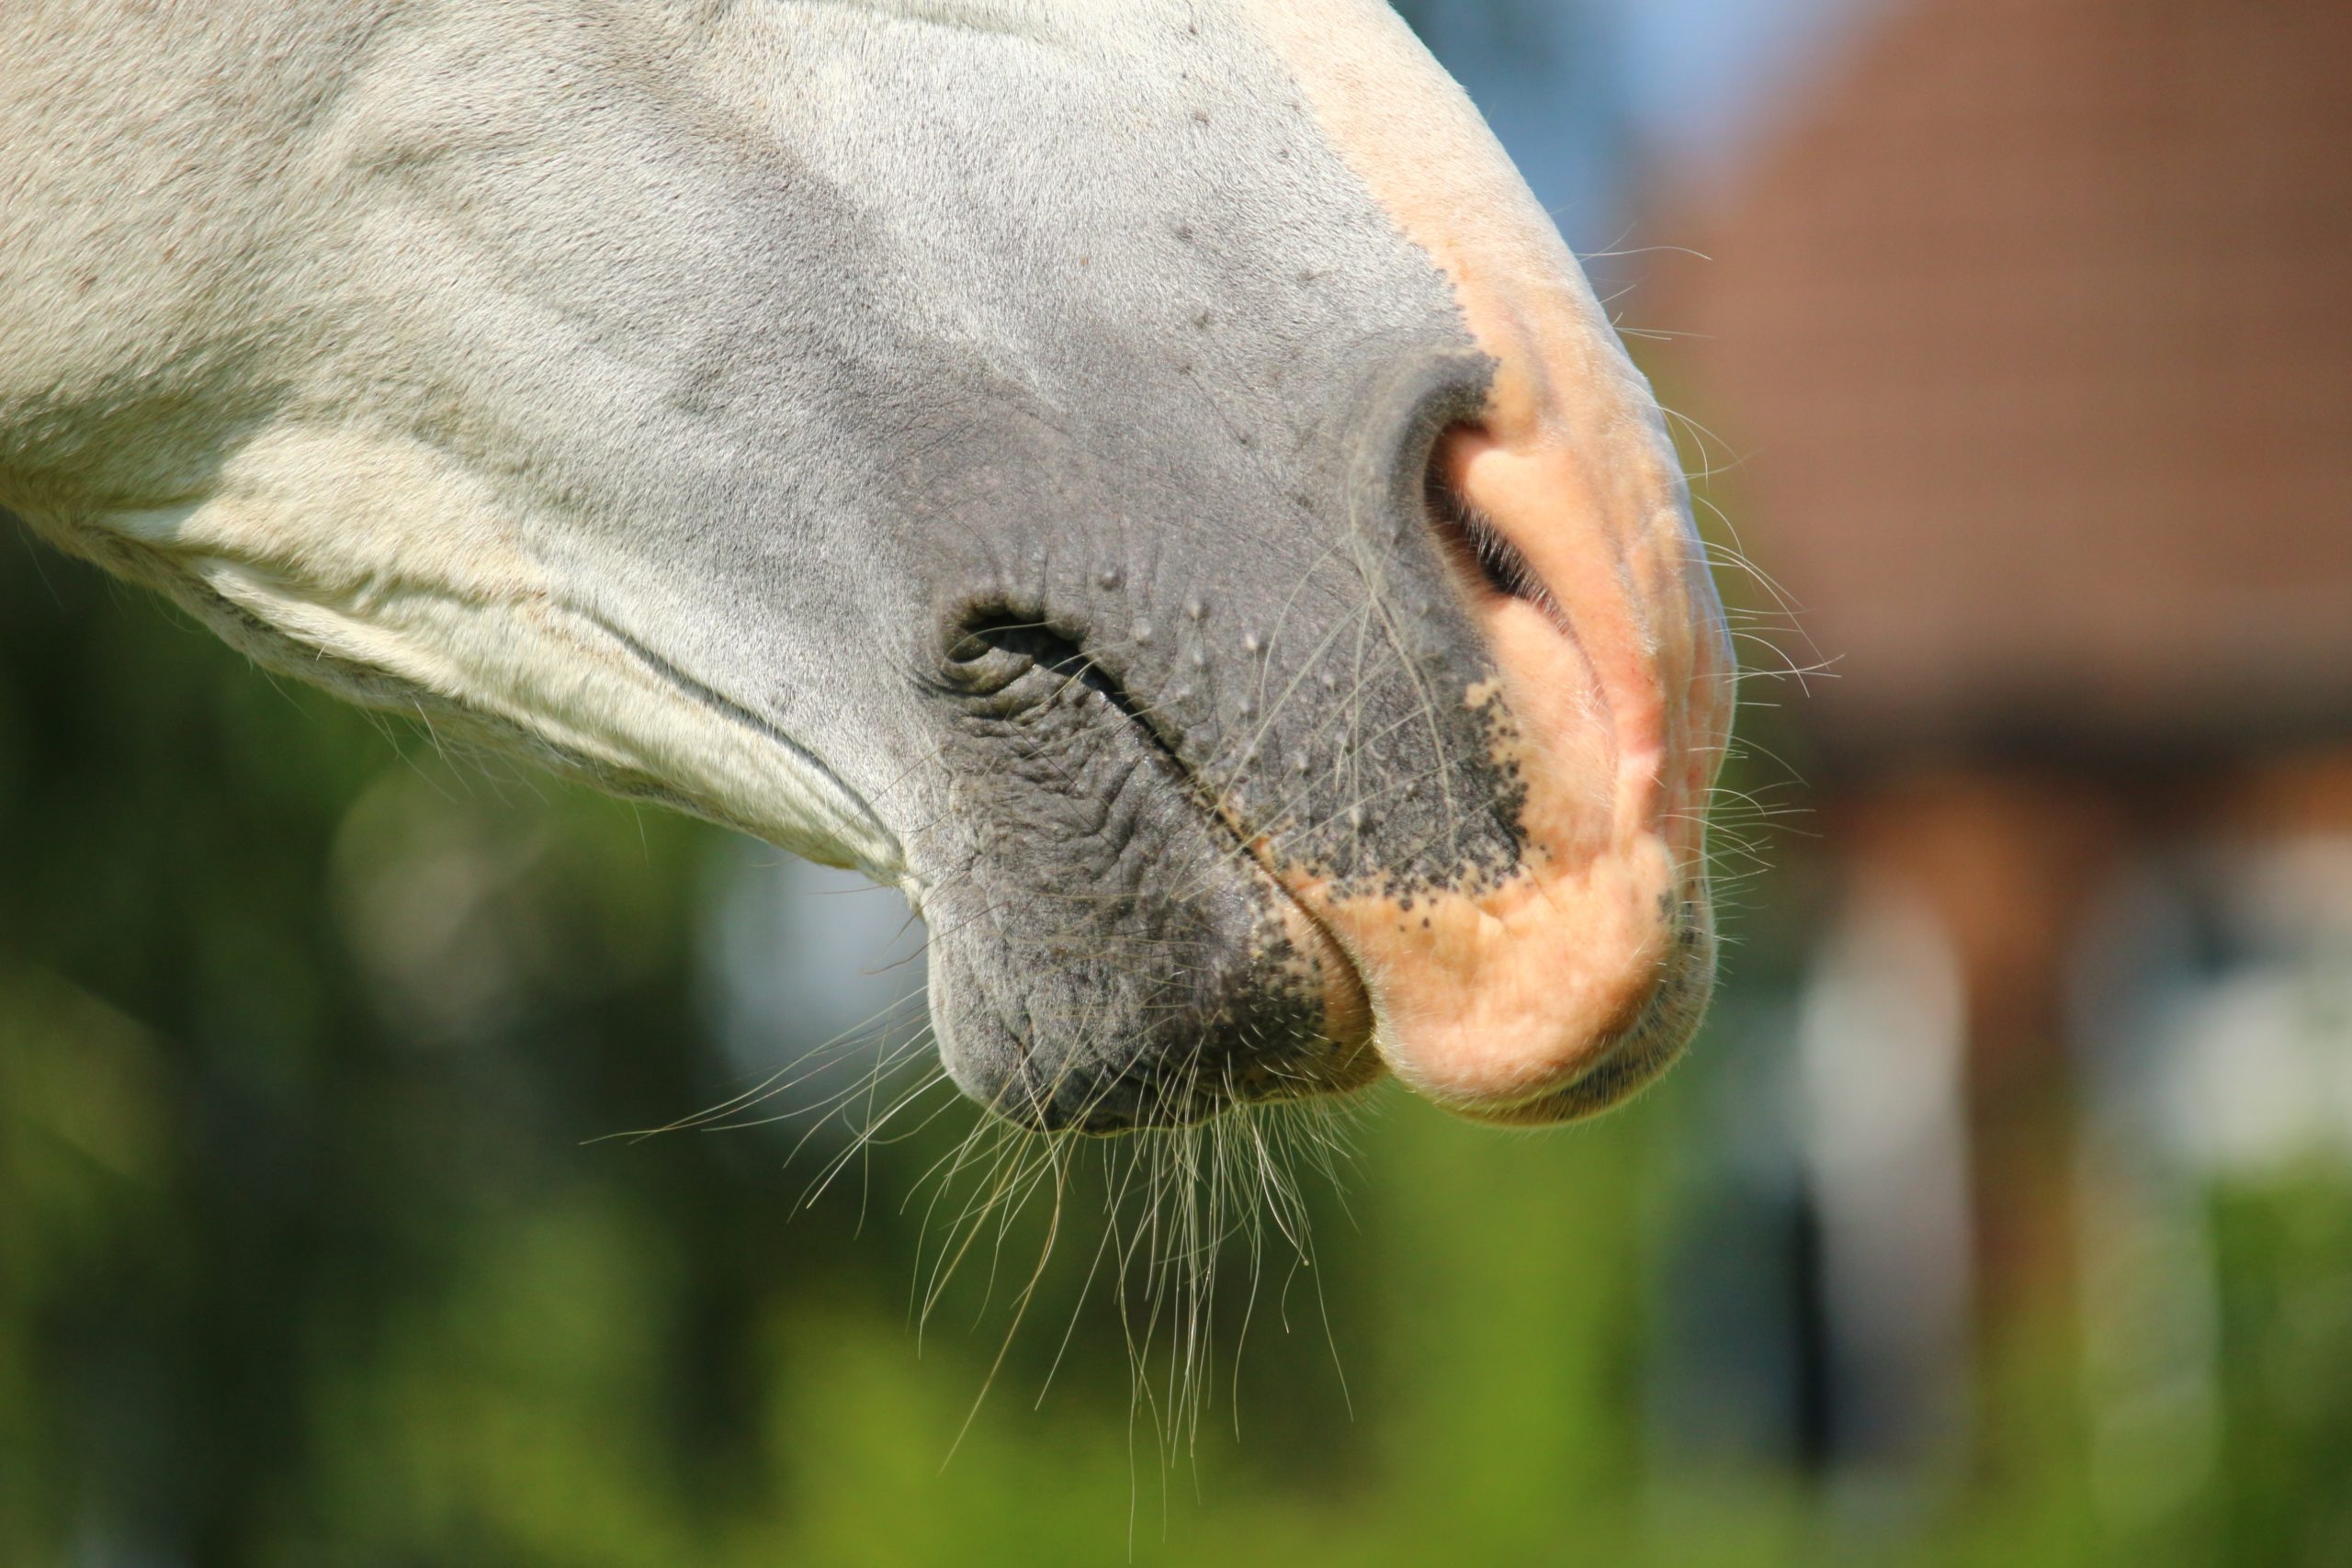 Protect Your Horse from Sunburn